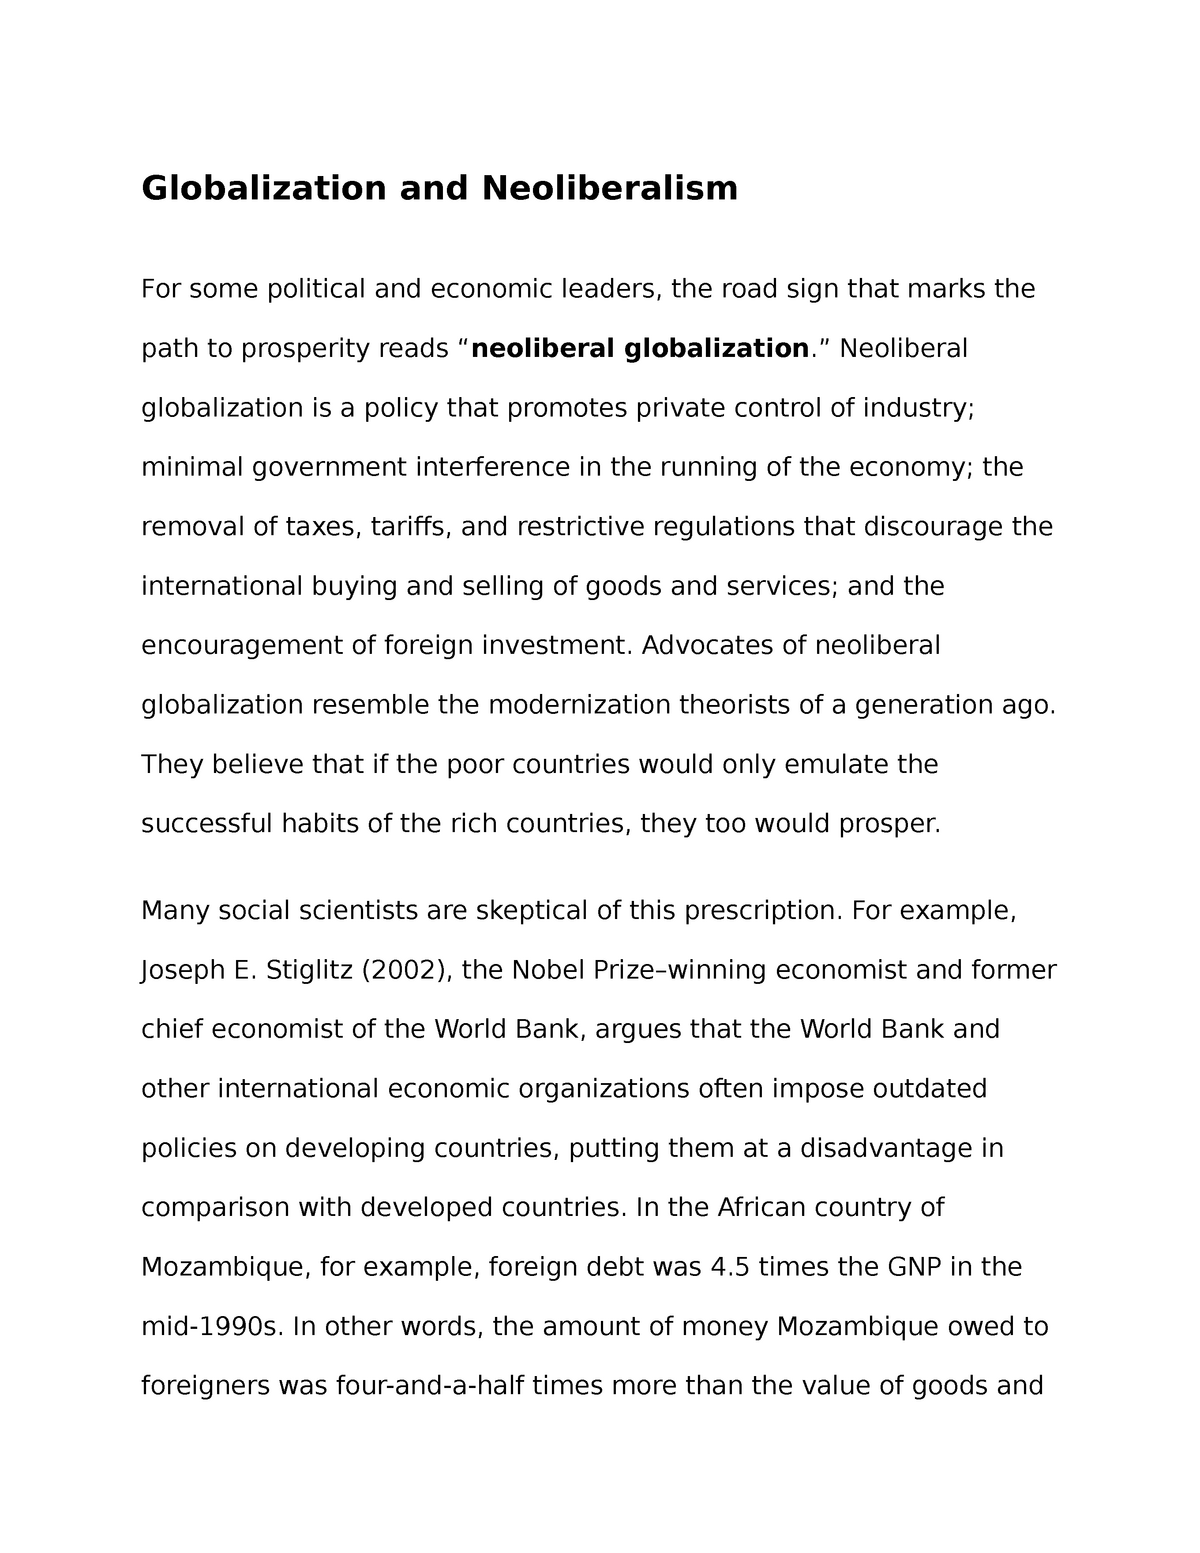 globalization promotes world peace and unity essay